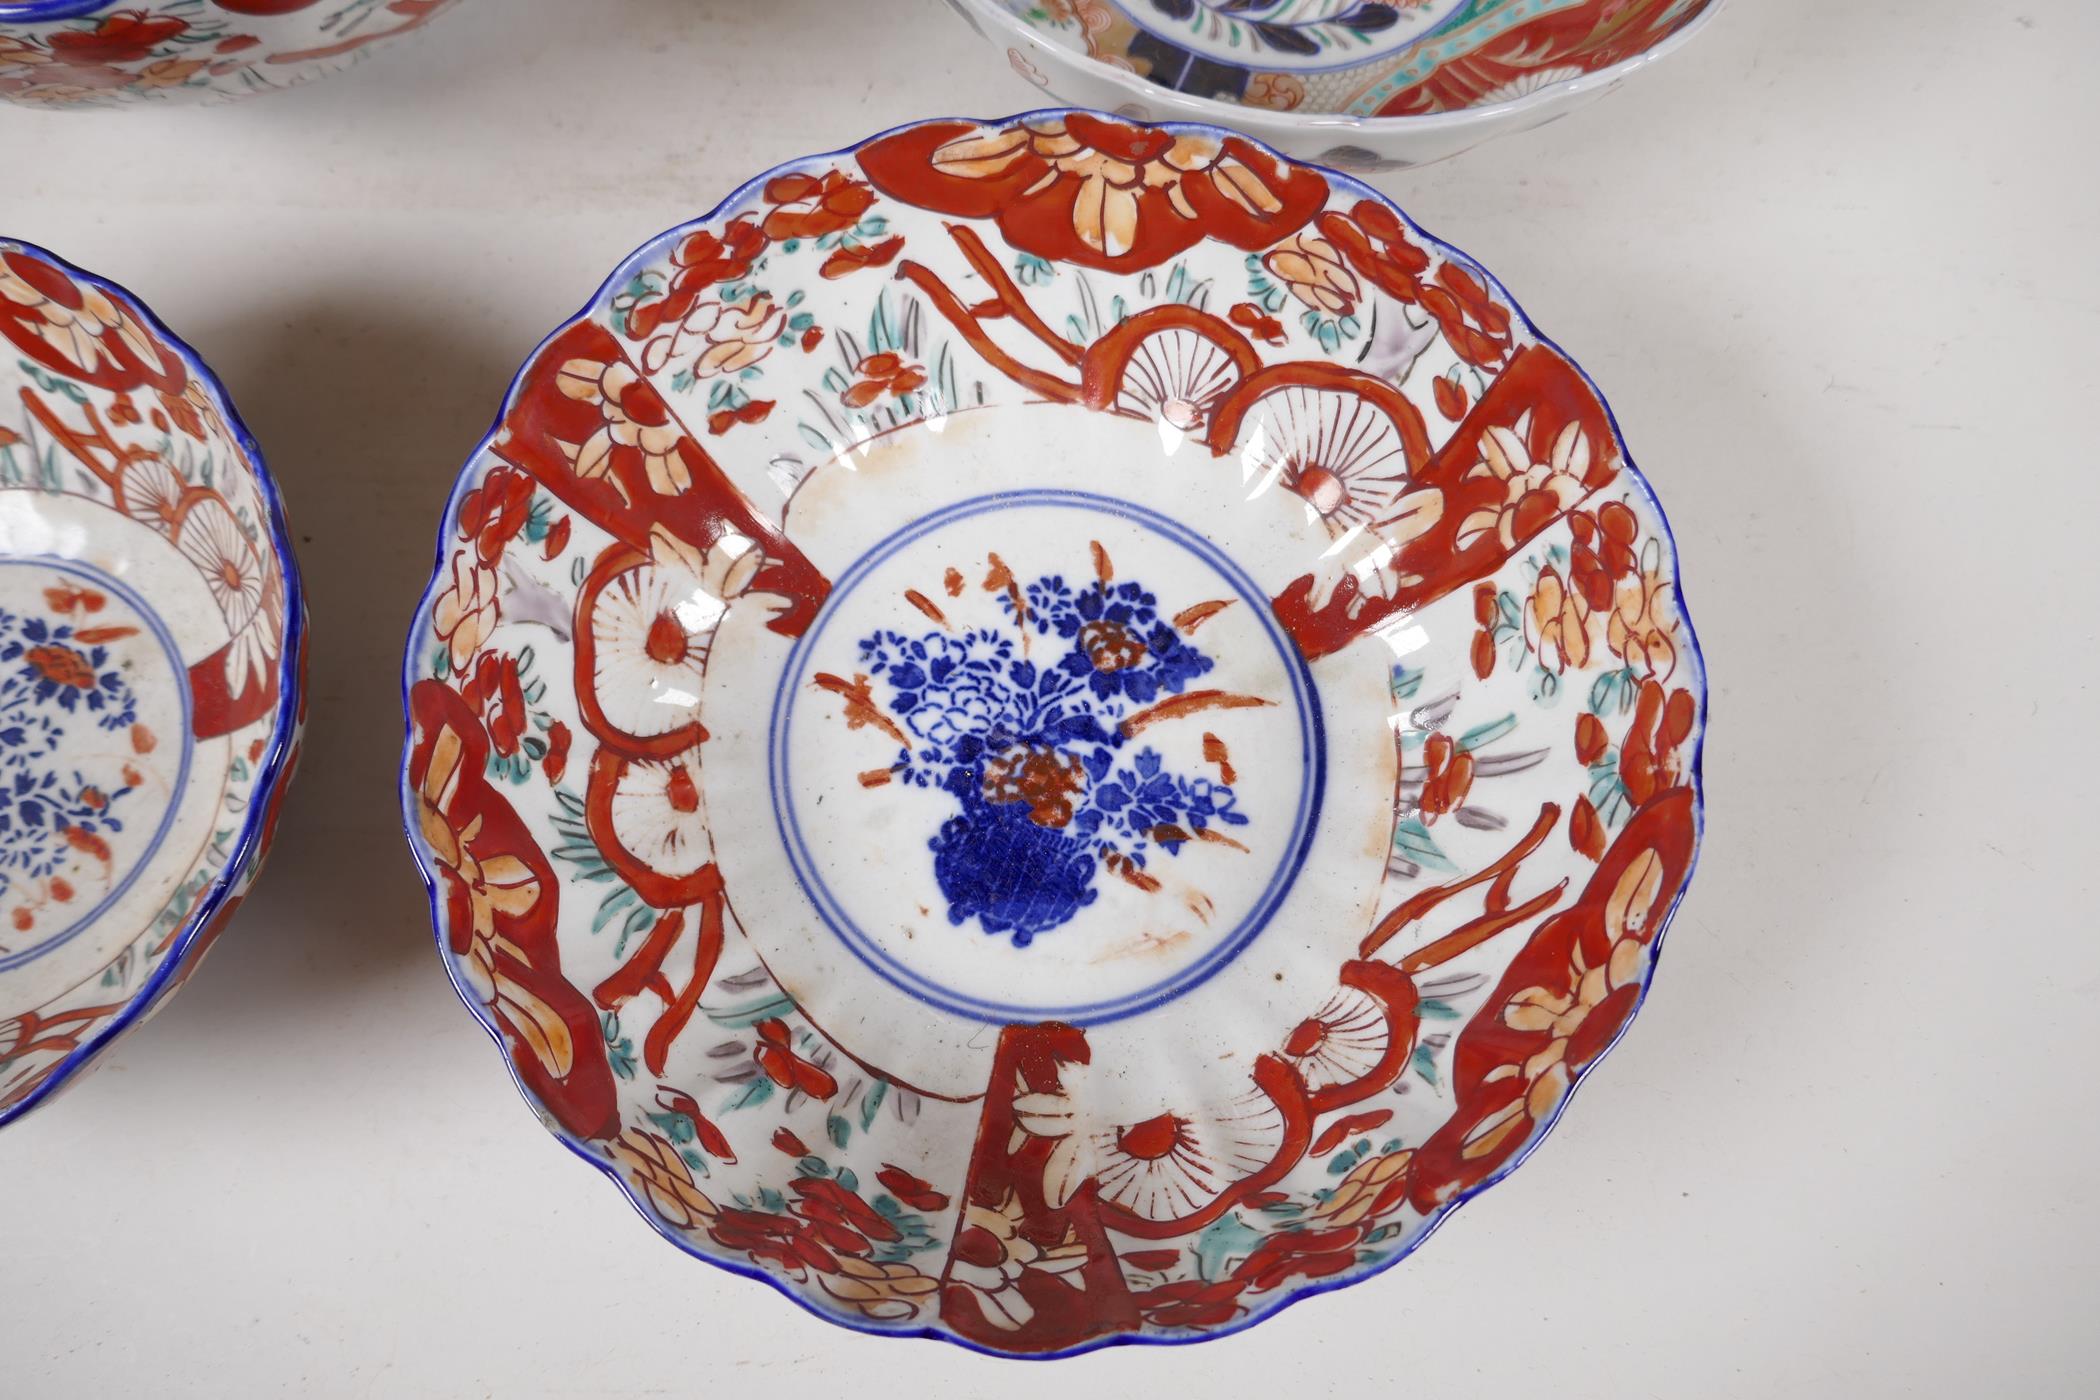 Four C19th Imari porcelain bowls decorated with traditional patterns, largest 10" diameter - Image 4 of 5